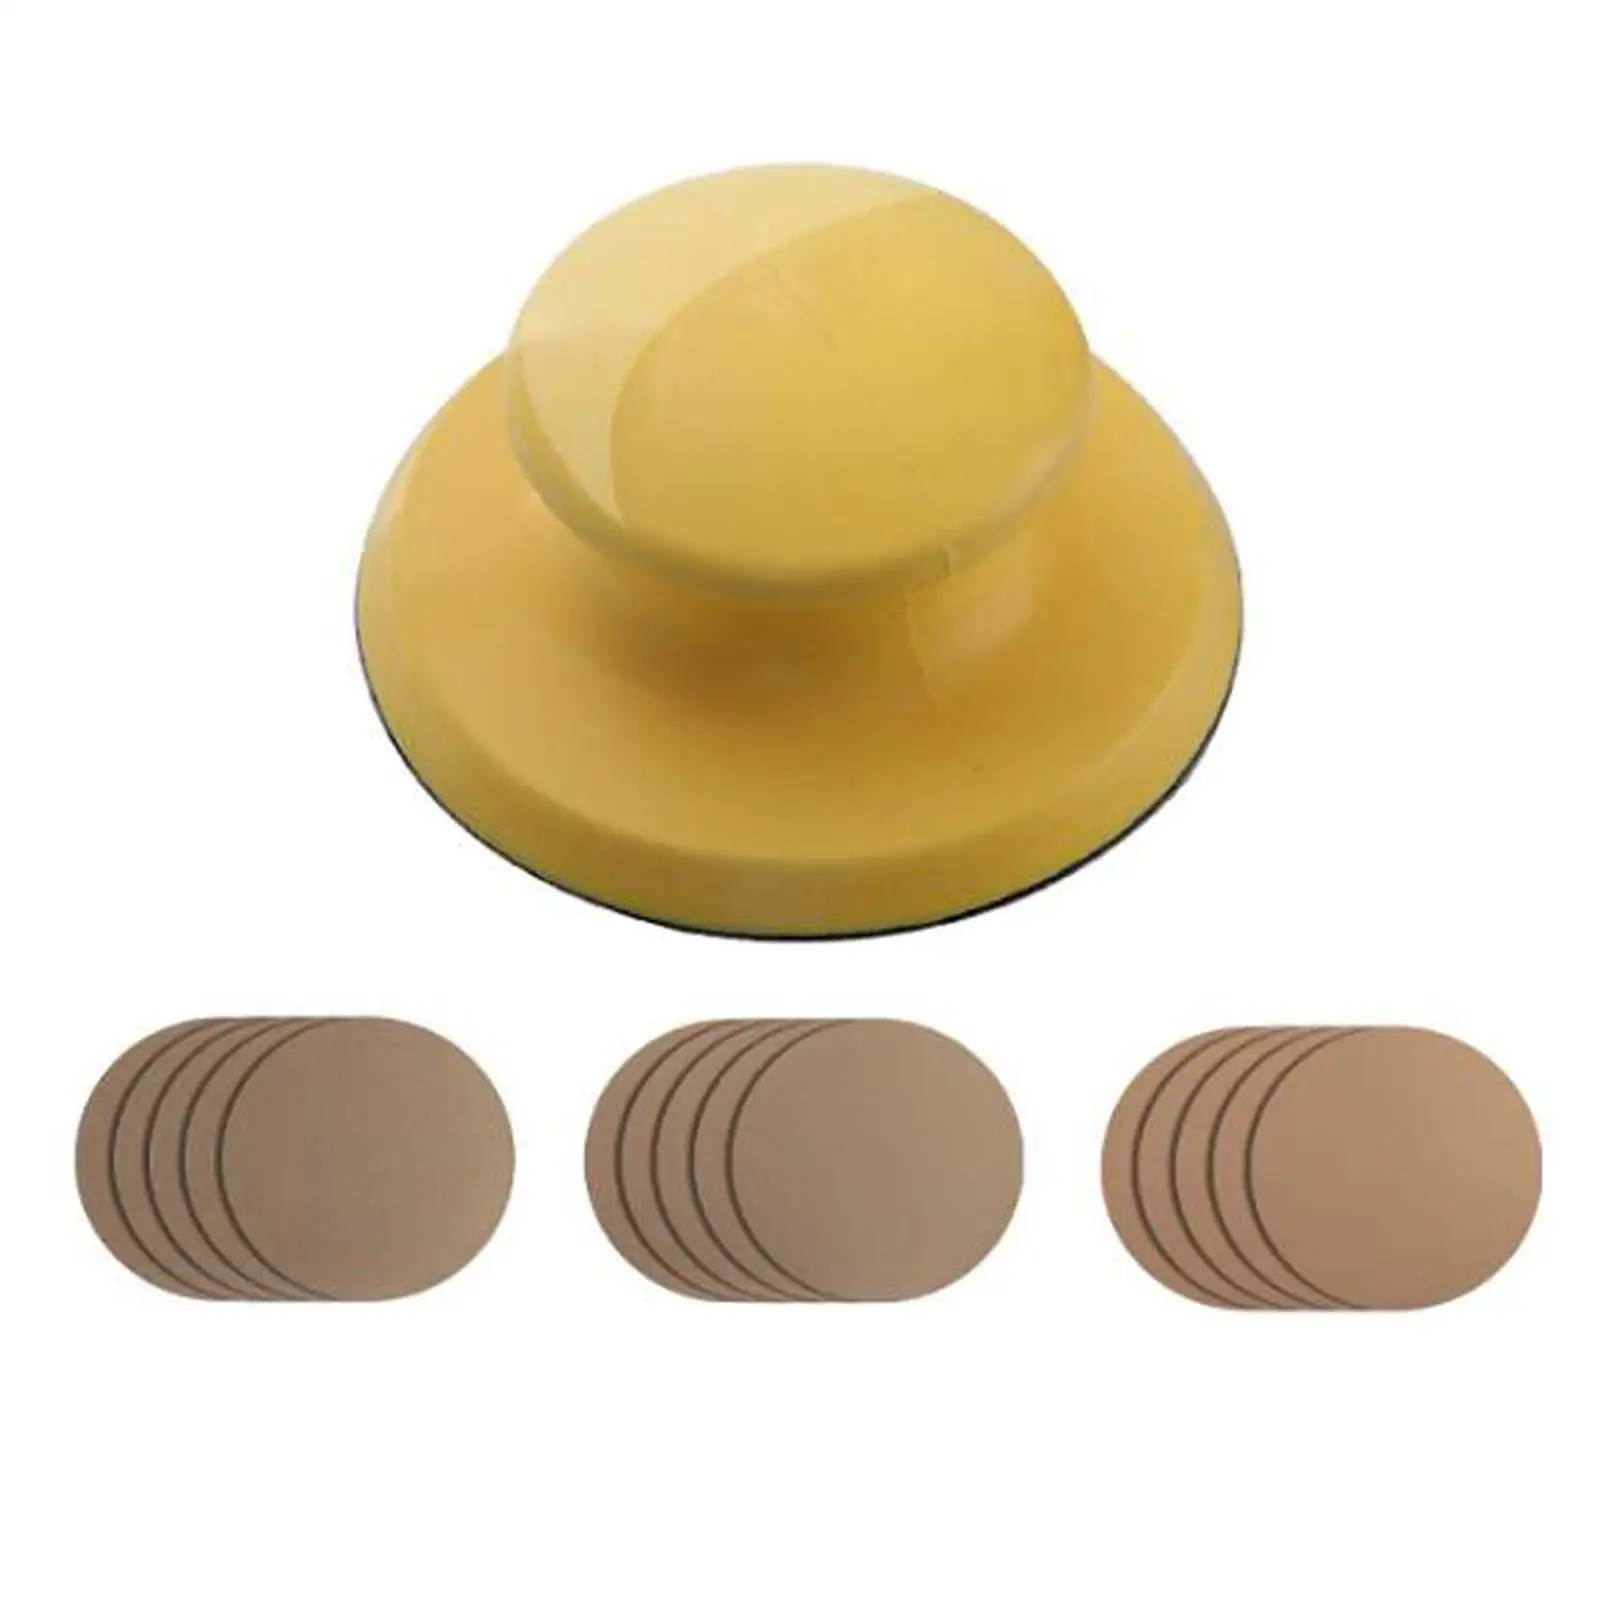 Portable Sanding Kit Self Adhesive Sanding Disc Mini Sander for Small Projects Wood Products Finishing Polishing